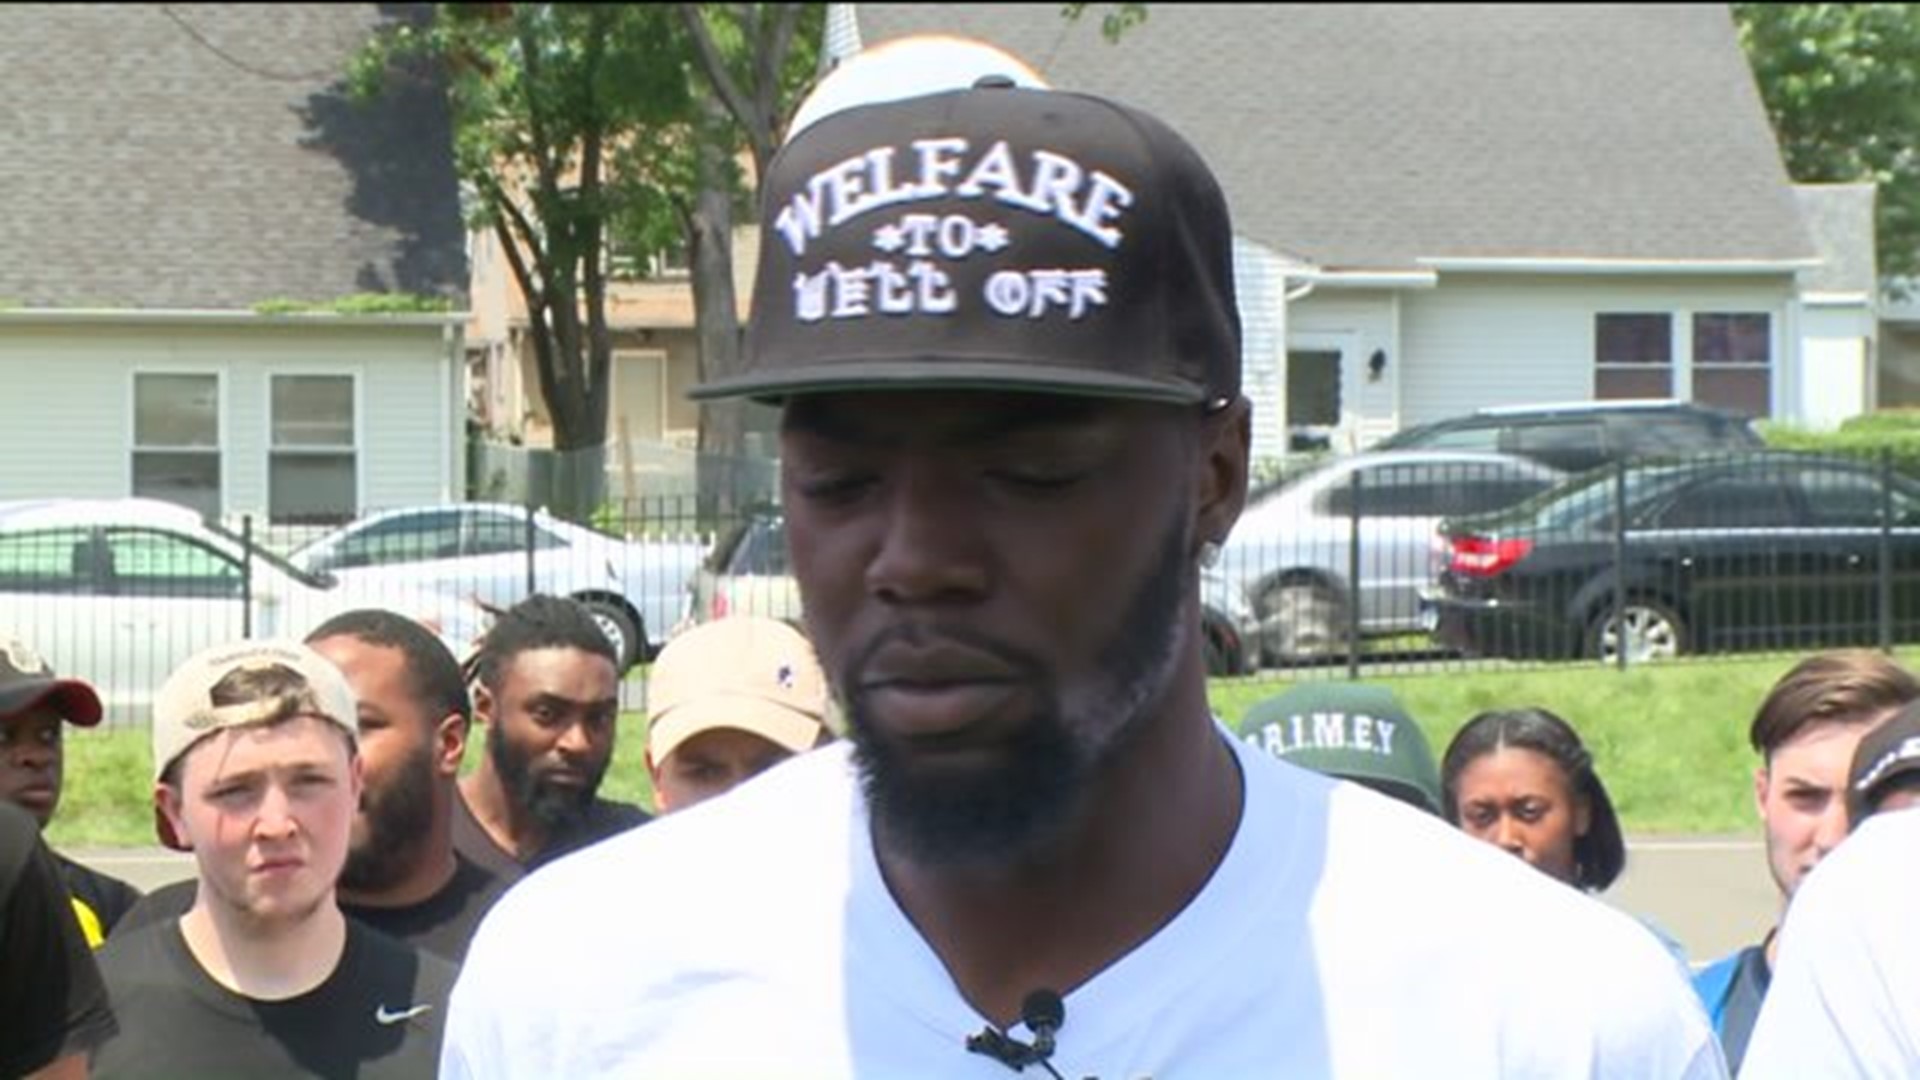 Organizer of Hartford basketball tournament at which someone was shot dead speaks out